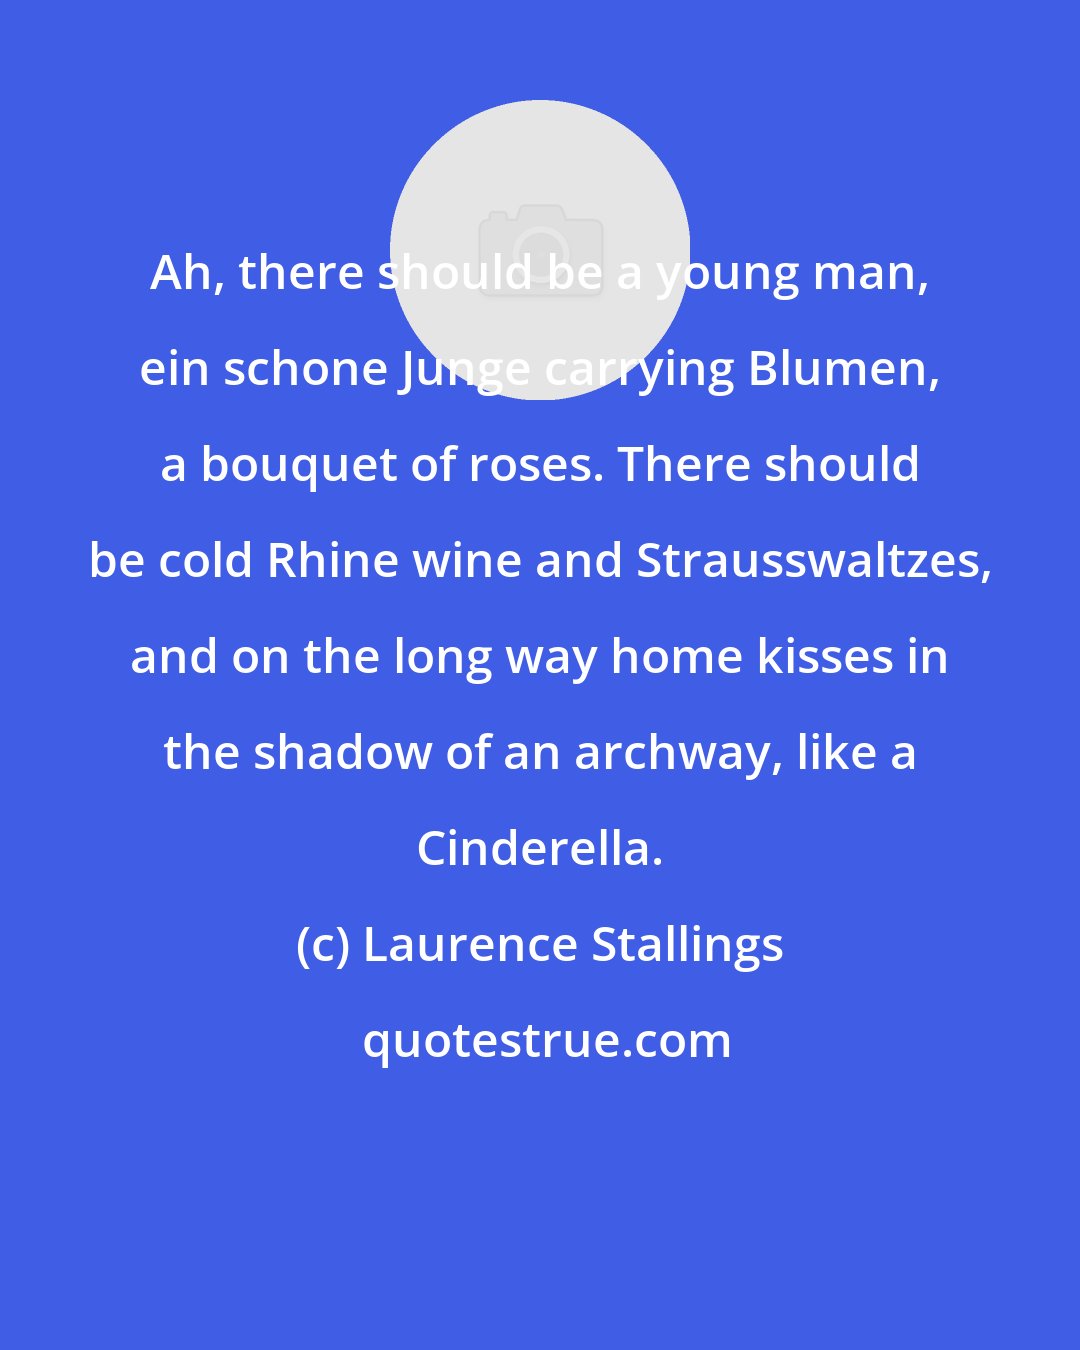 Laurence Stallings: Ah, there should be a young man, ein schone Junge carrying Blumen, a bouquet of roses. There should be cold Rhine wine and Strausswaltzes, and on the long way home kisses in the shadow of an archway, like a Cinderella.